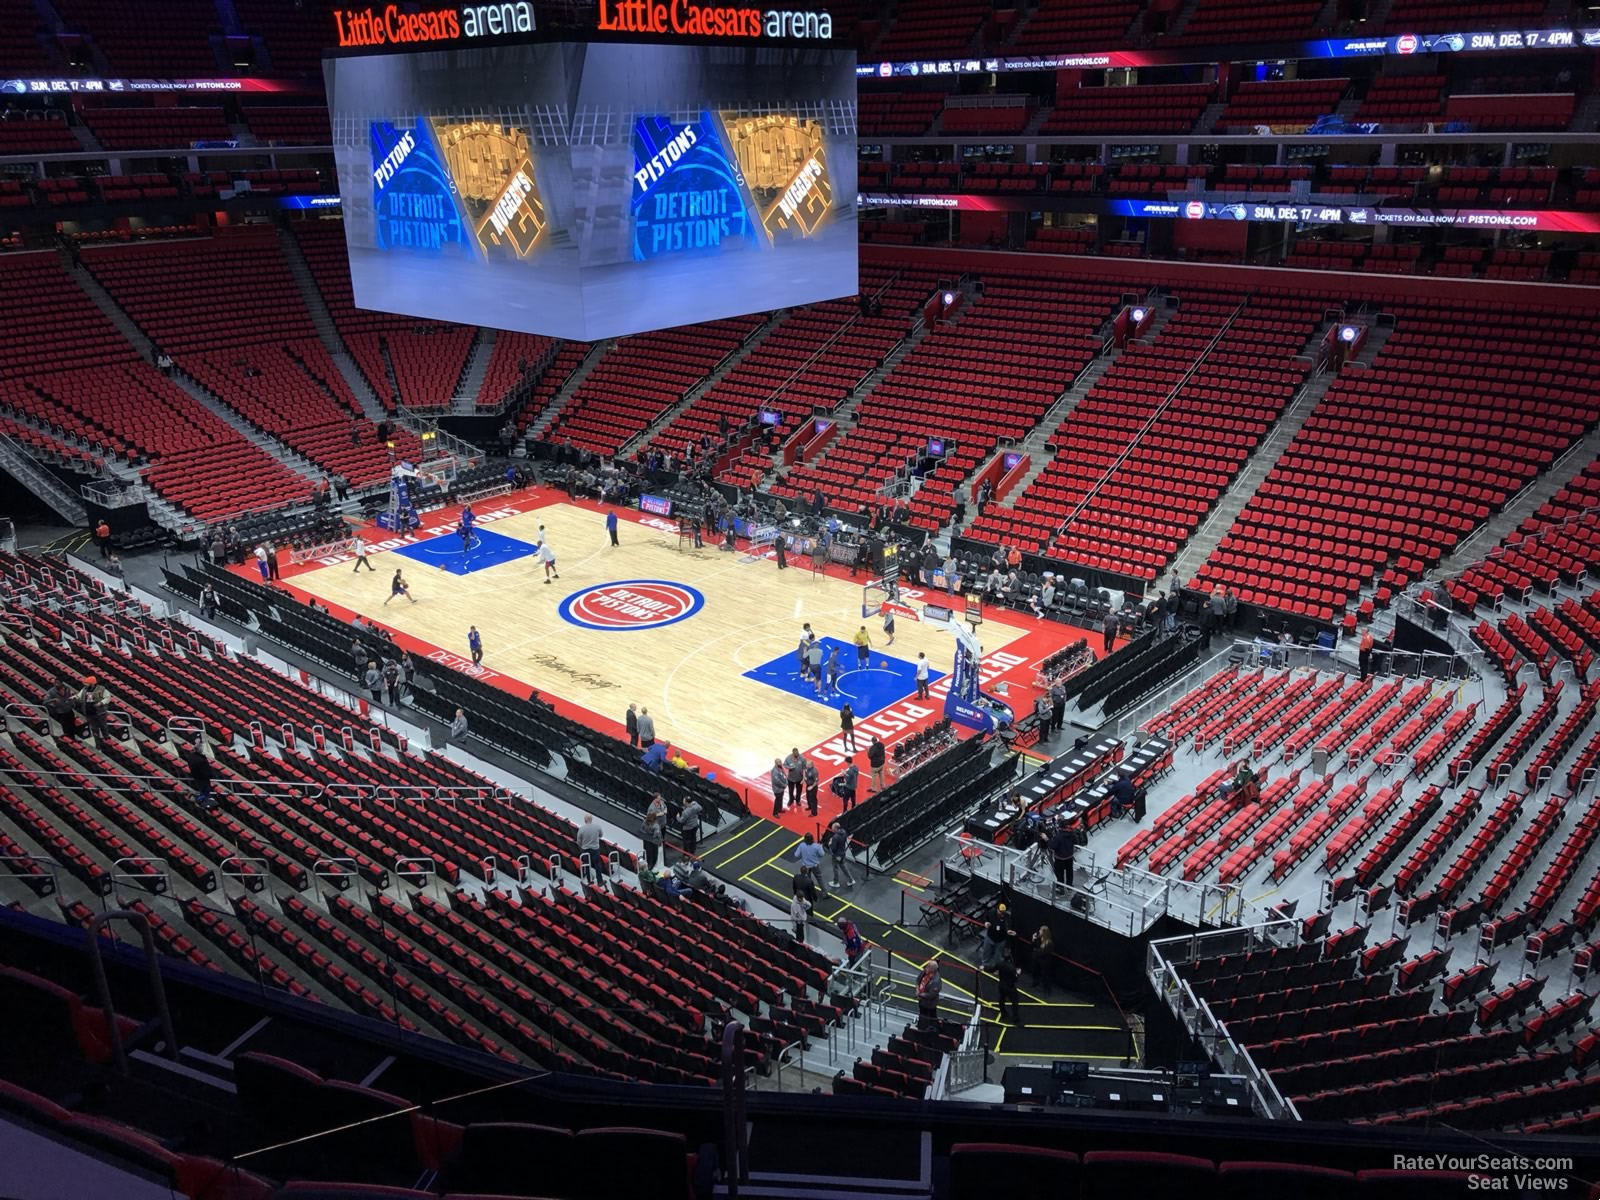 mezzanine 6, row 2 seat view  for basketball - little caesars arena